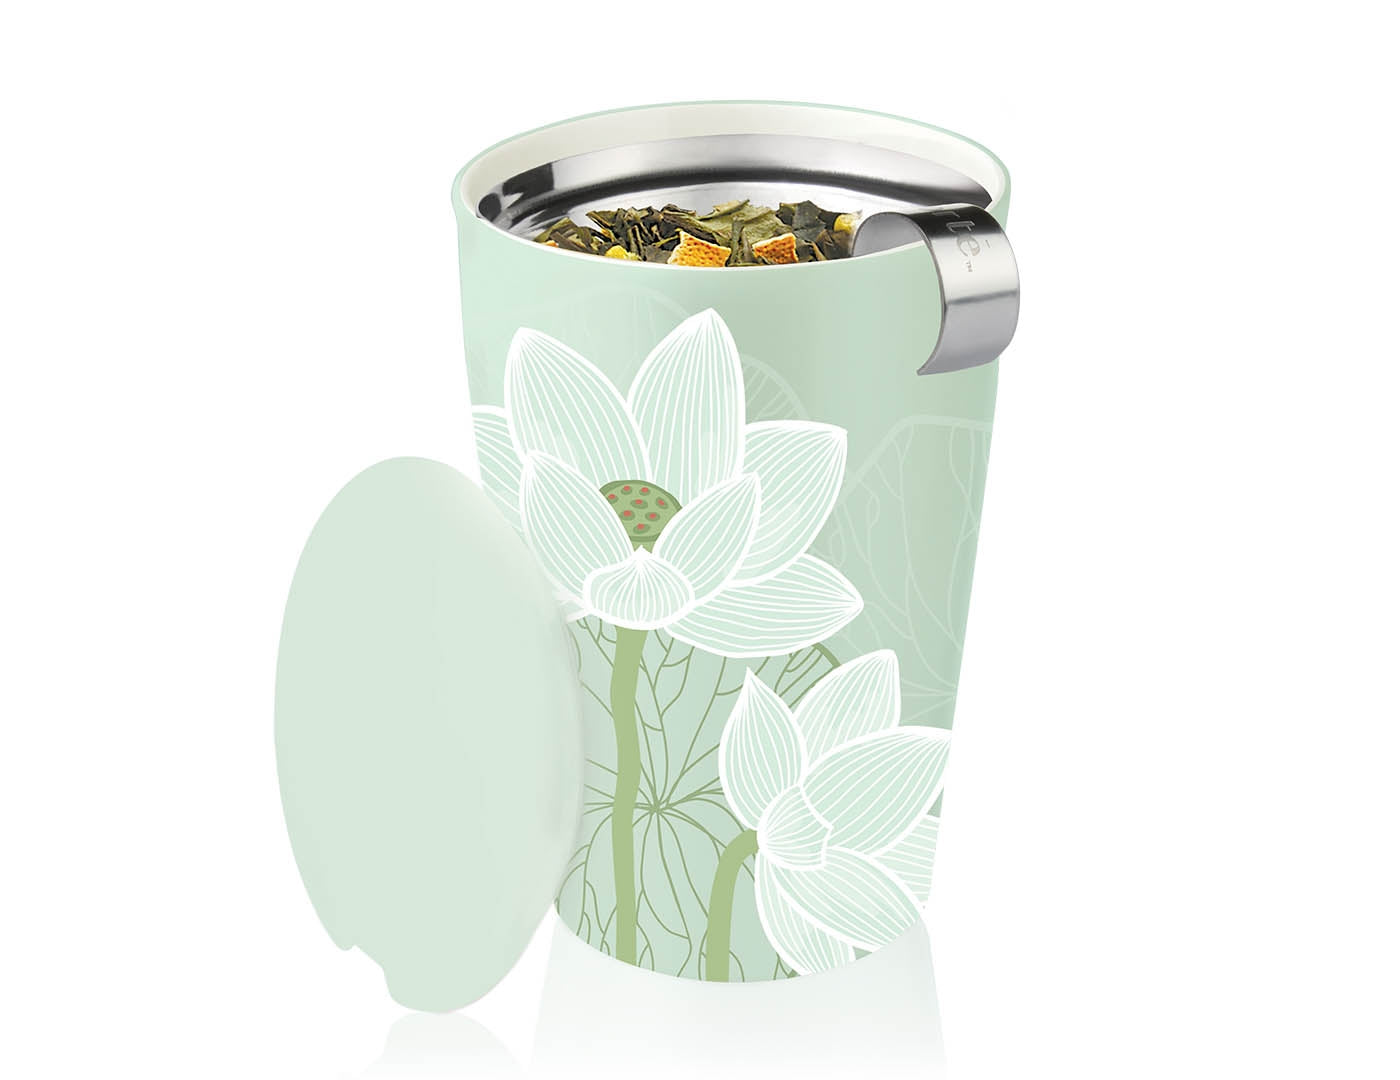 Lotus design KATI® Steeping cup with infuser showing infuser with tea leaves